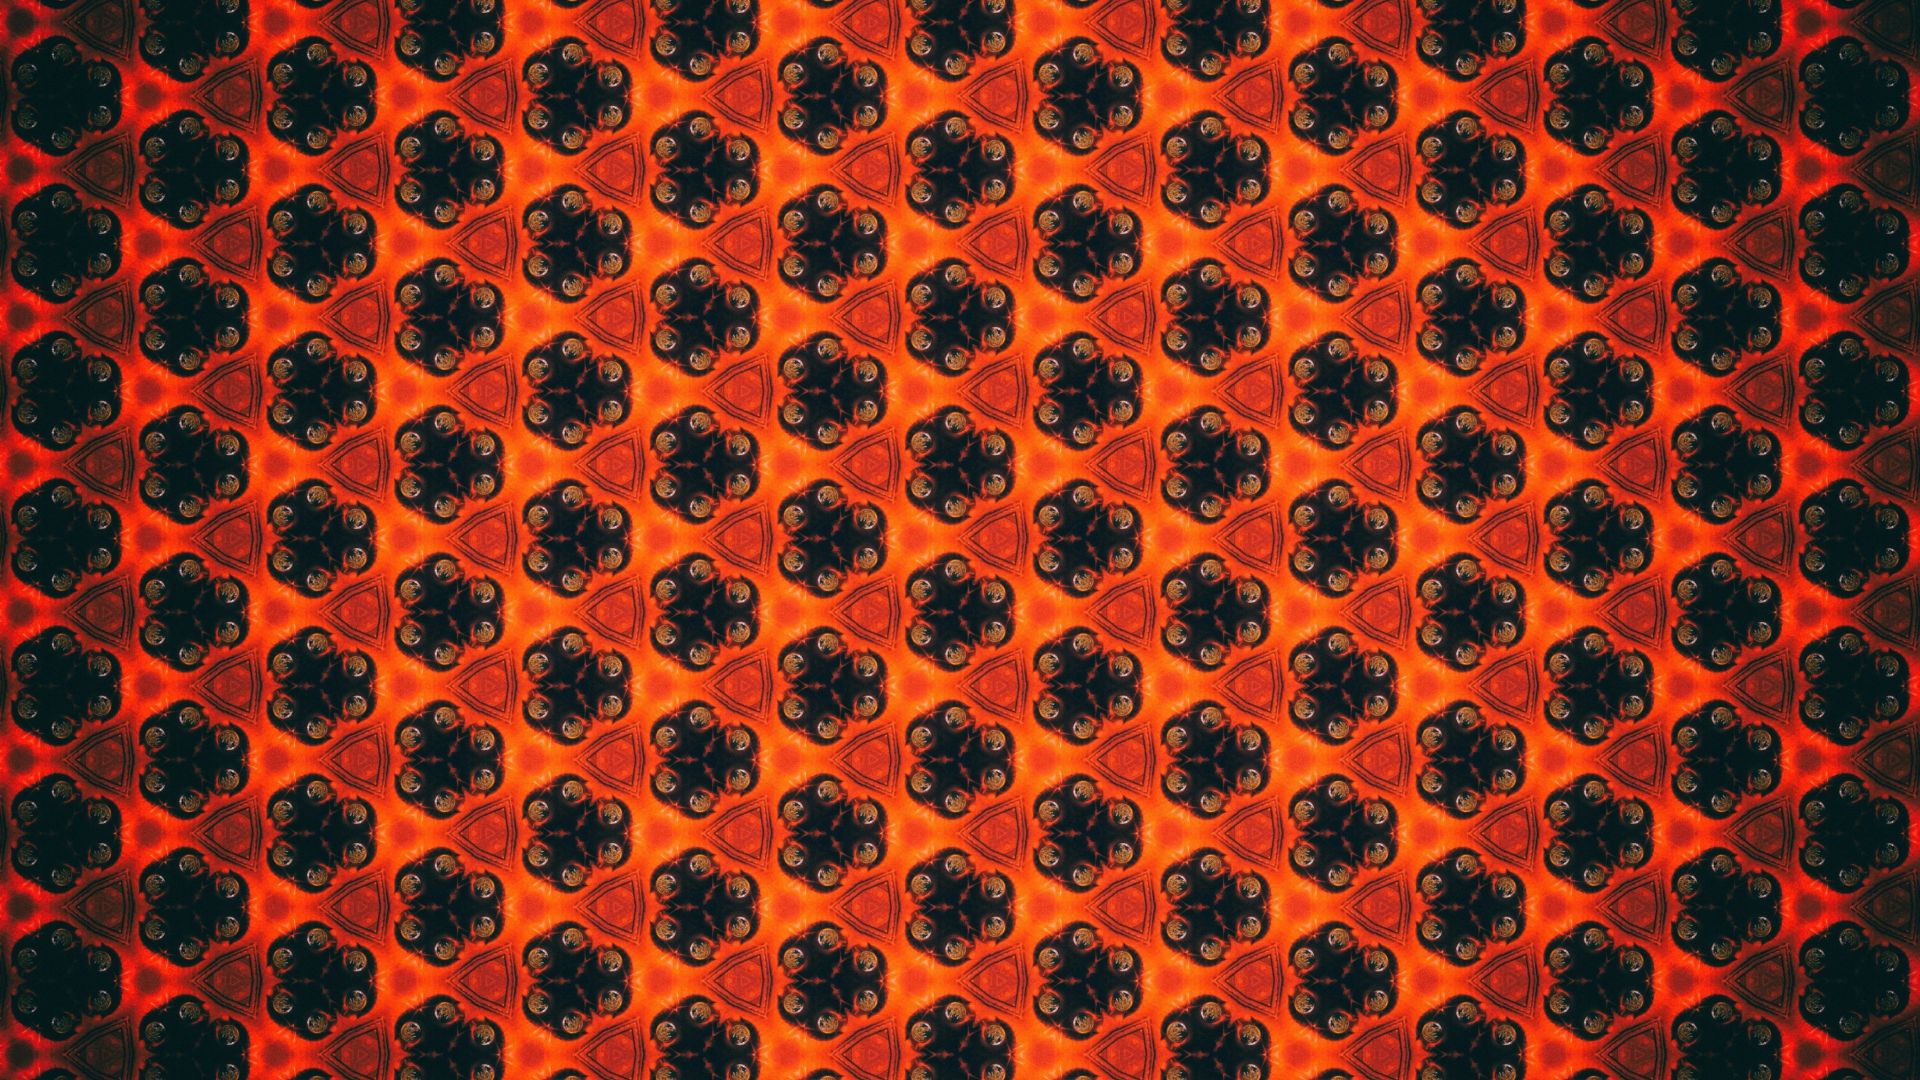 Wallpaper Patterns, flowers, shapes, abstract, 5k